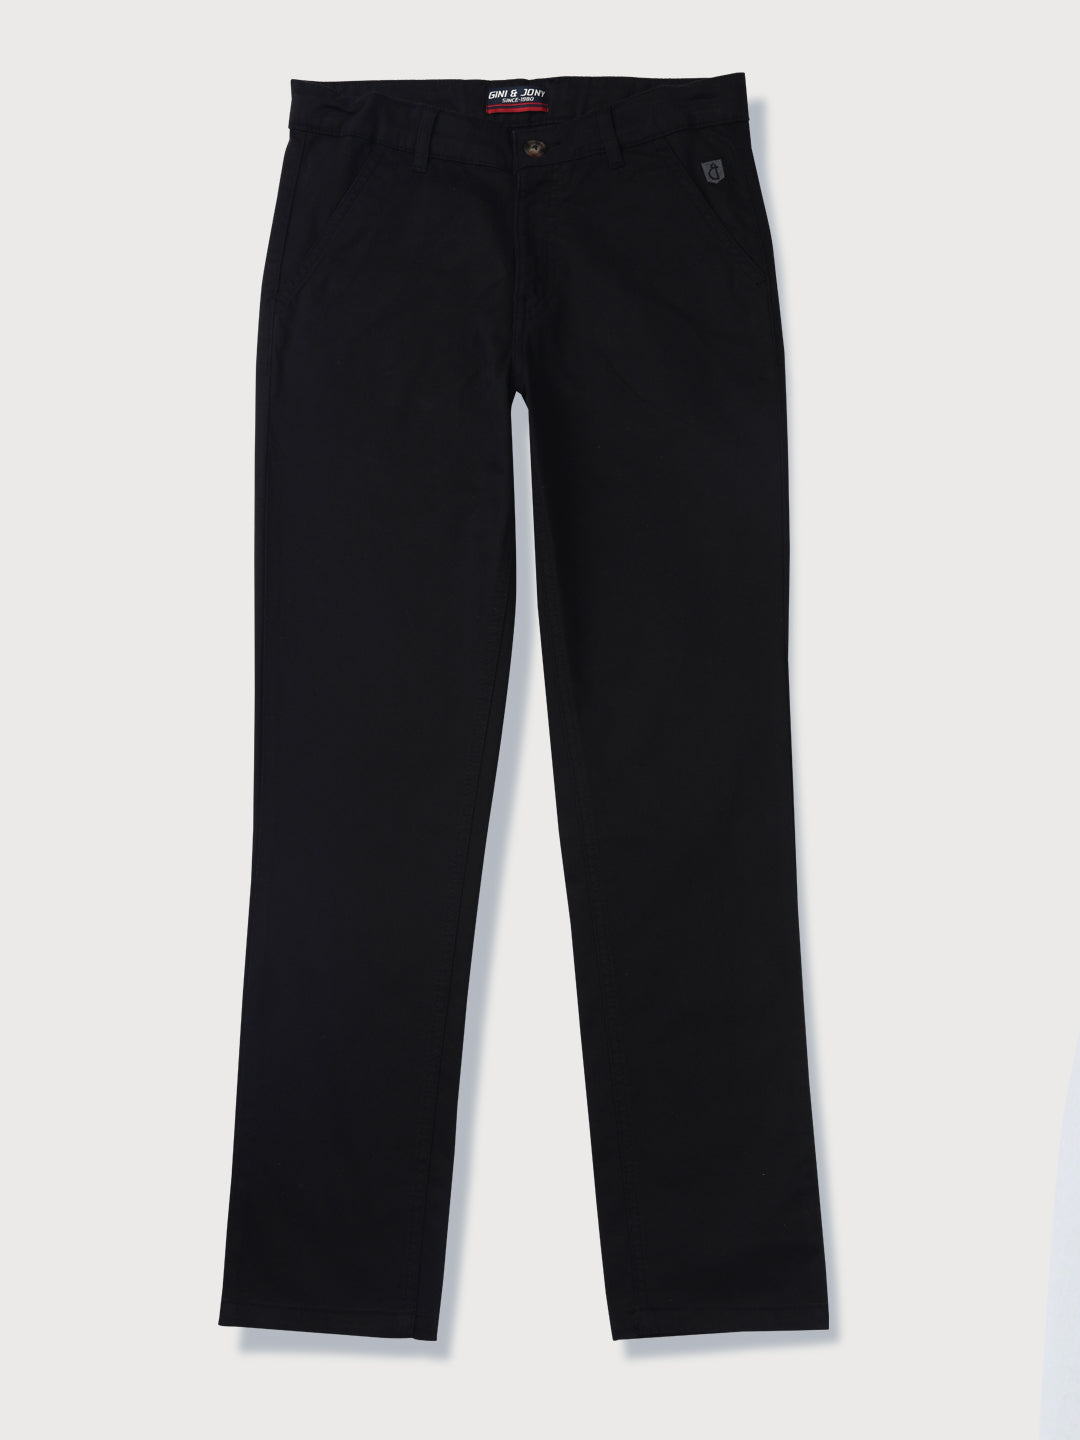 Boys Black Solid Knits Trouser